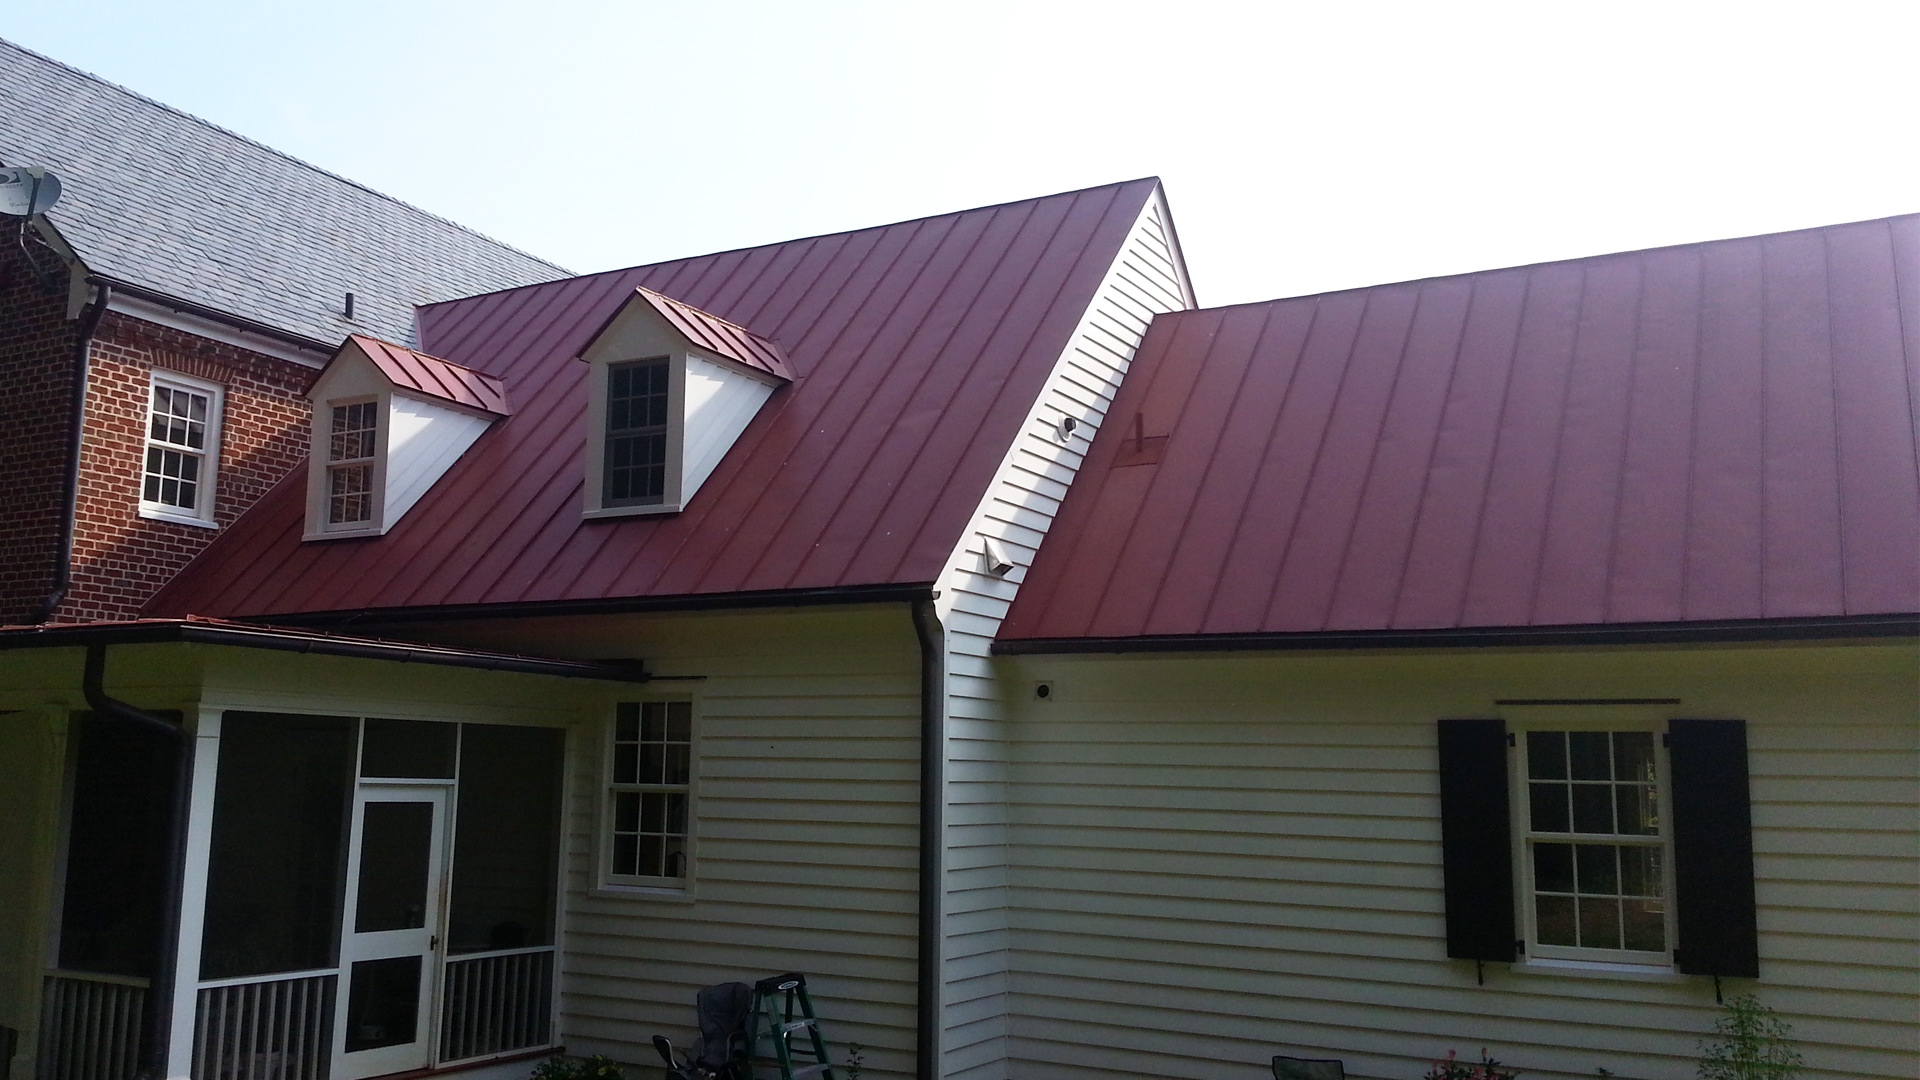 Mechanical double lock standing seam colonial red aluminum roof panel installation